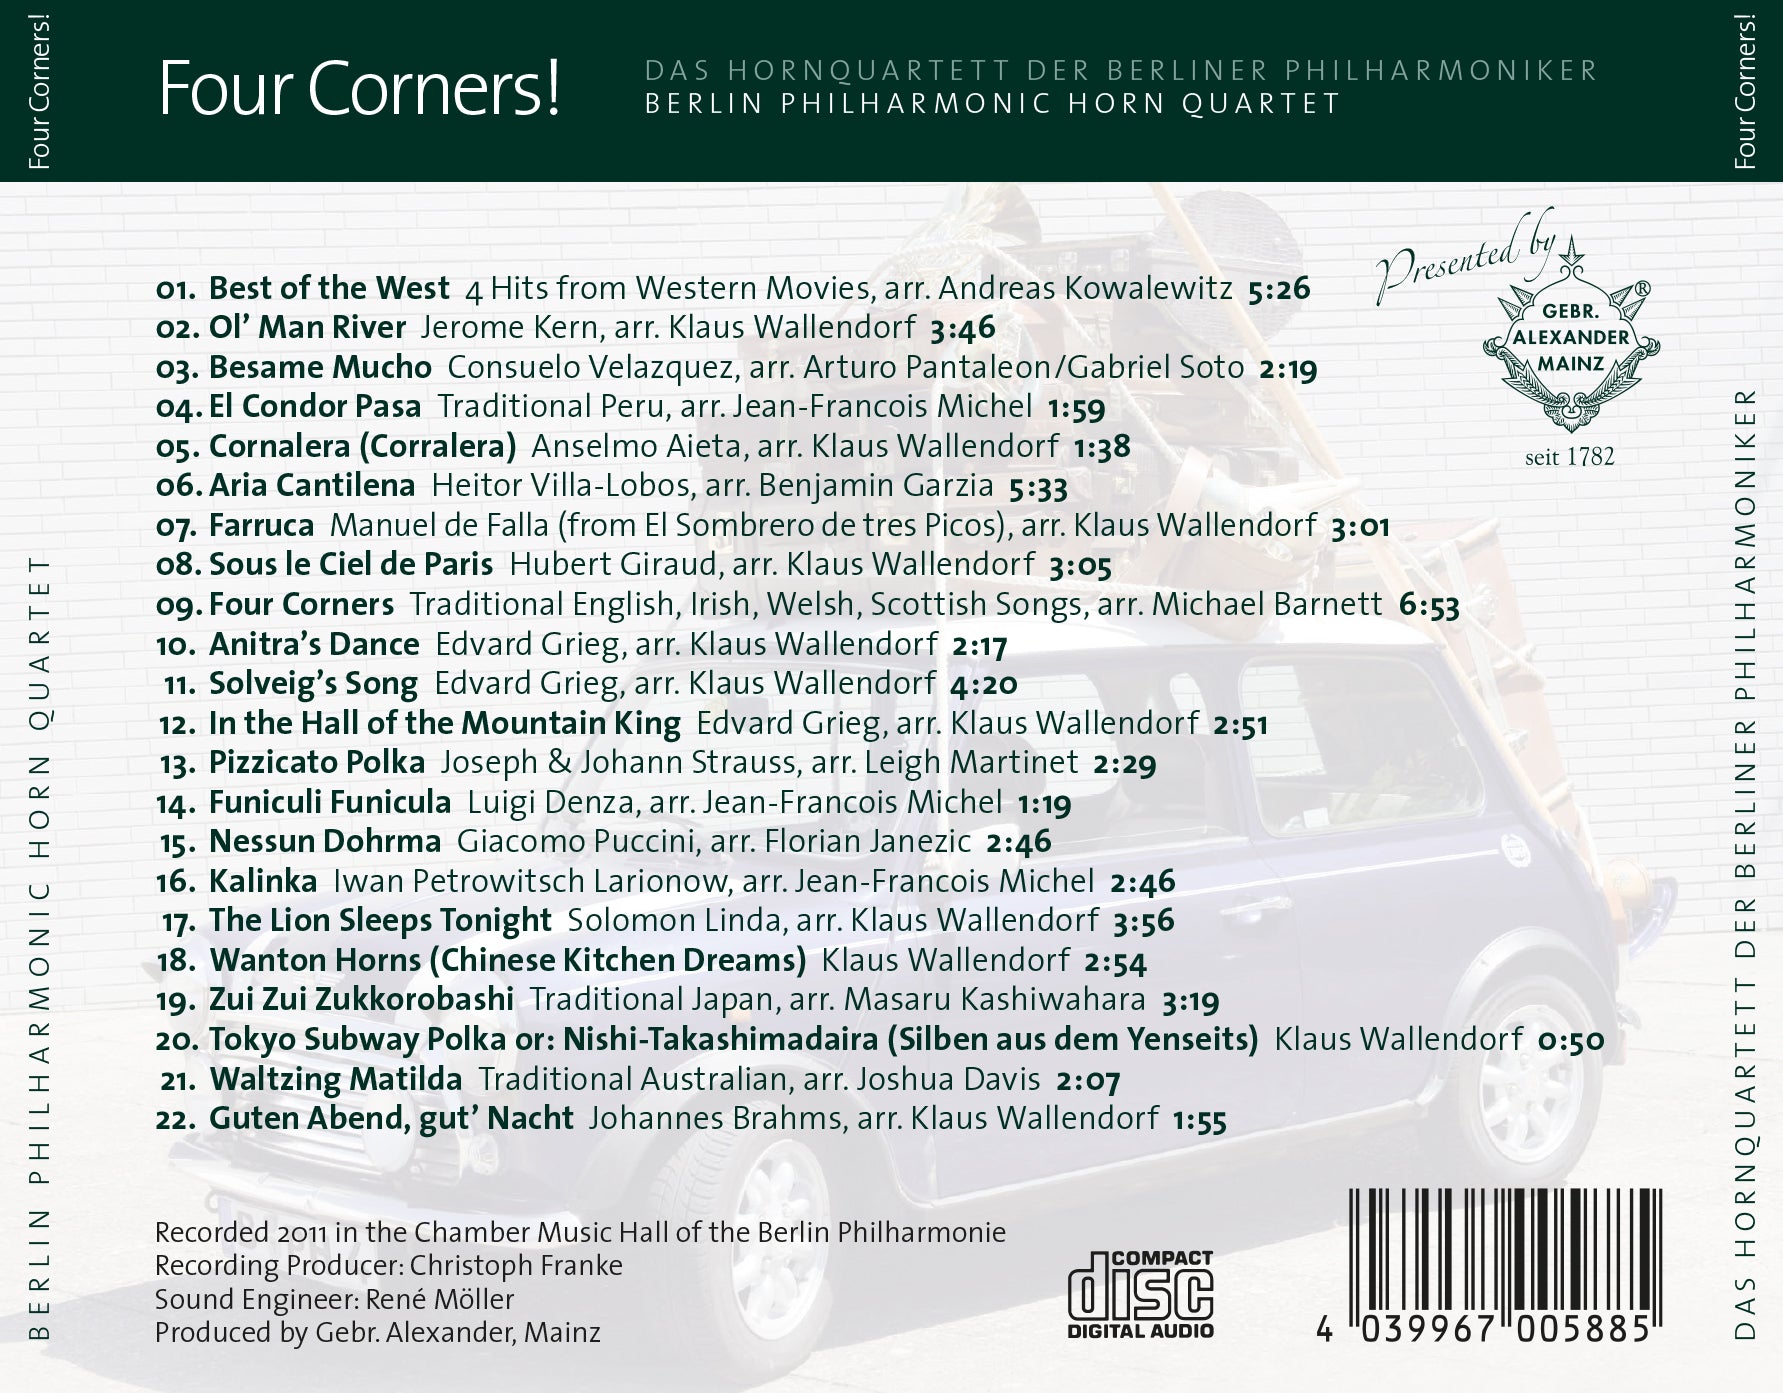 CD: Four Corners! by the Horn Quartet of the Berlin Philharmonic Orchestra